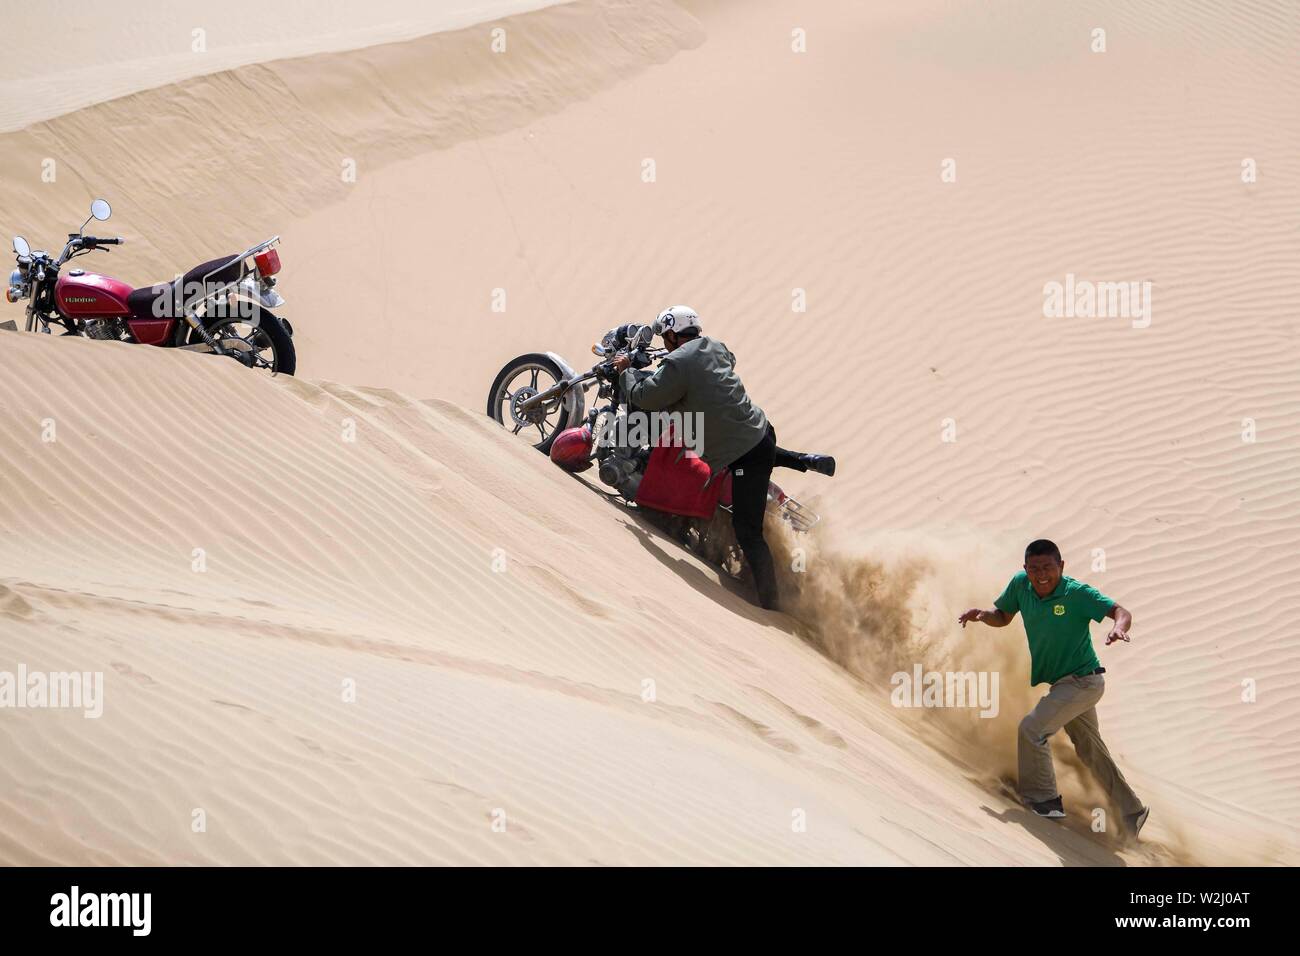 (190709) -- YULI, July 9, 2019 (Xinhua) -- Forest rangers try to pull a motorcycle out of sand on their patrol way in Yuli County, northwest China's Xinjiang Uygur Autonomous Region, June 20, 2019. Wriggling along the rim of the Taklimakan desert, the 1,321-km-long Tarim River in northwest China's Xinjiang Uygur Autonomous Region nurtures the largest area of populus euphratica forests in the world.   As local government launched a project on populus euphratica forest restoration along the Tarim River three years ago, the vegetation has been increasing and forest rangers have been playing a mor Stock Photo